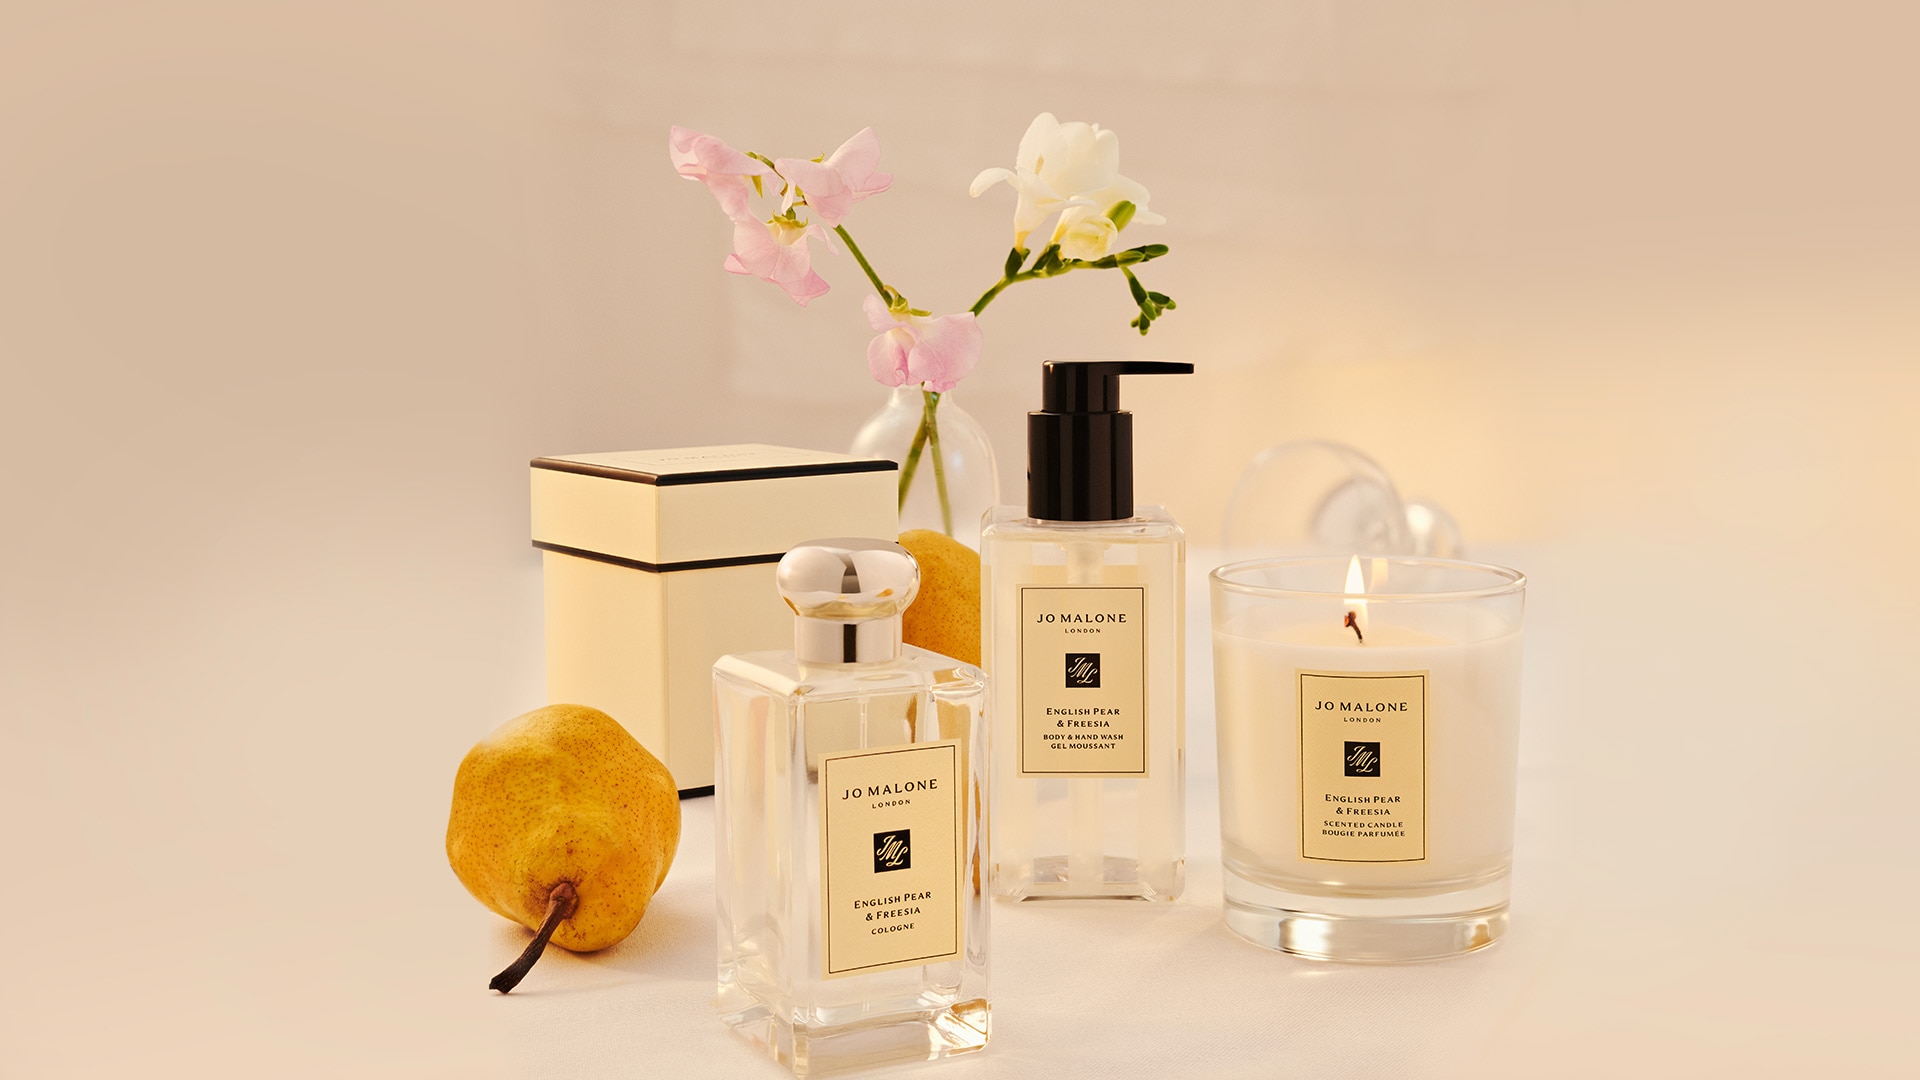 English Pear & Freesia Forever. Discover Our Bestselling Scents.